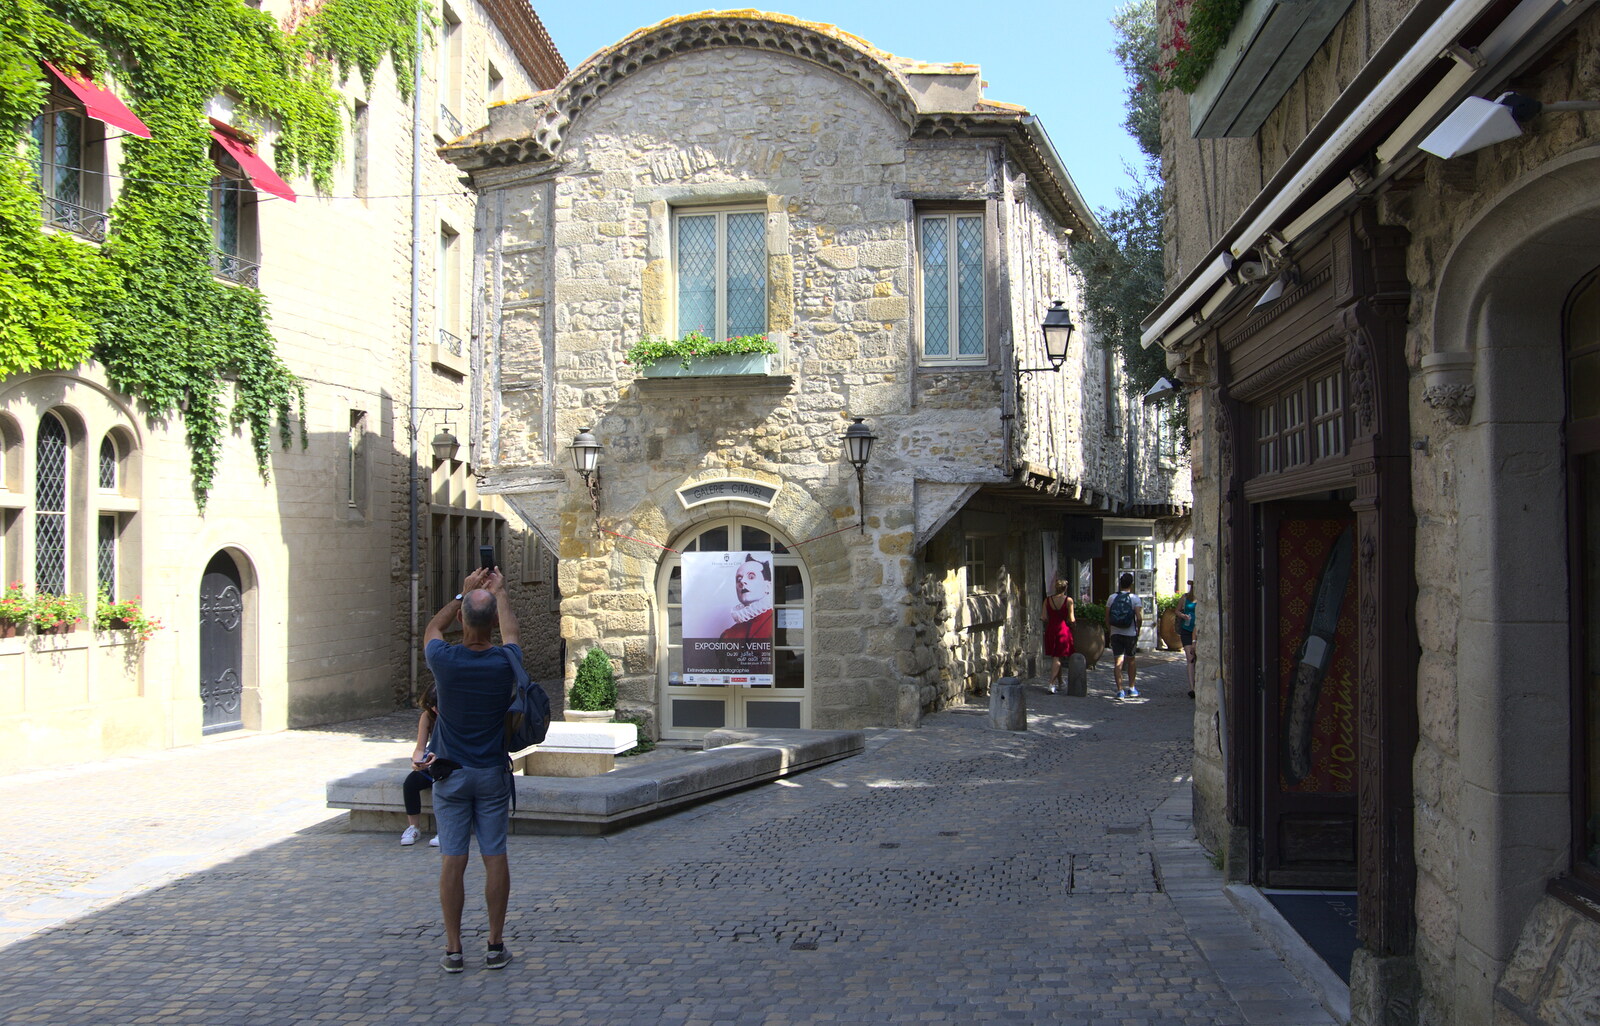 An interesting house from A Trip to Carcassonne, Aude, France - 8th August 2018